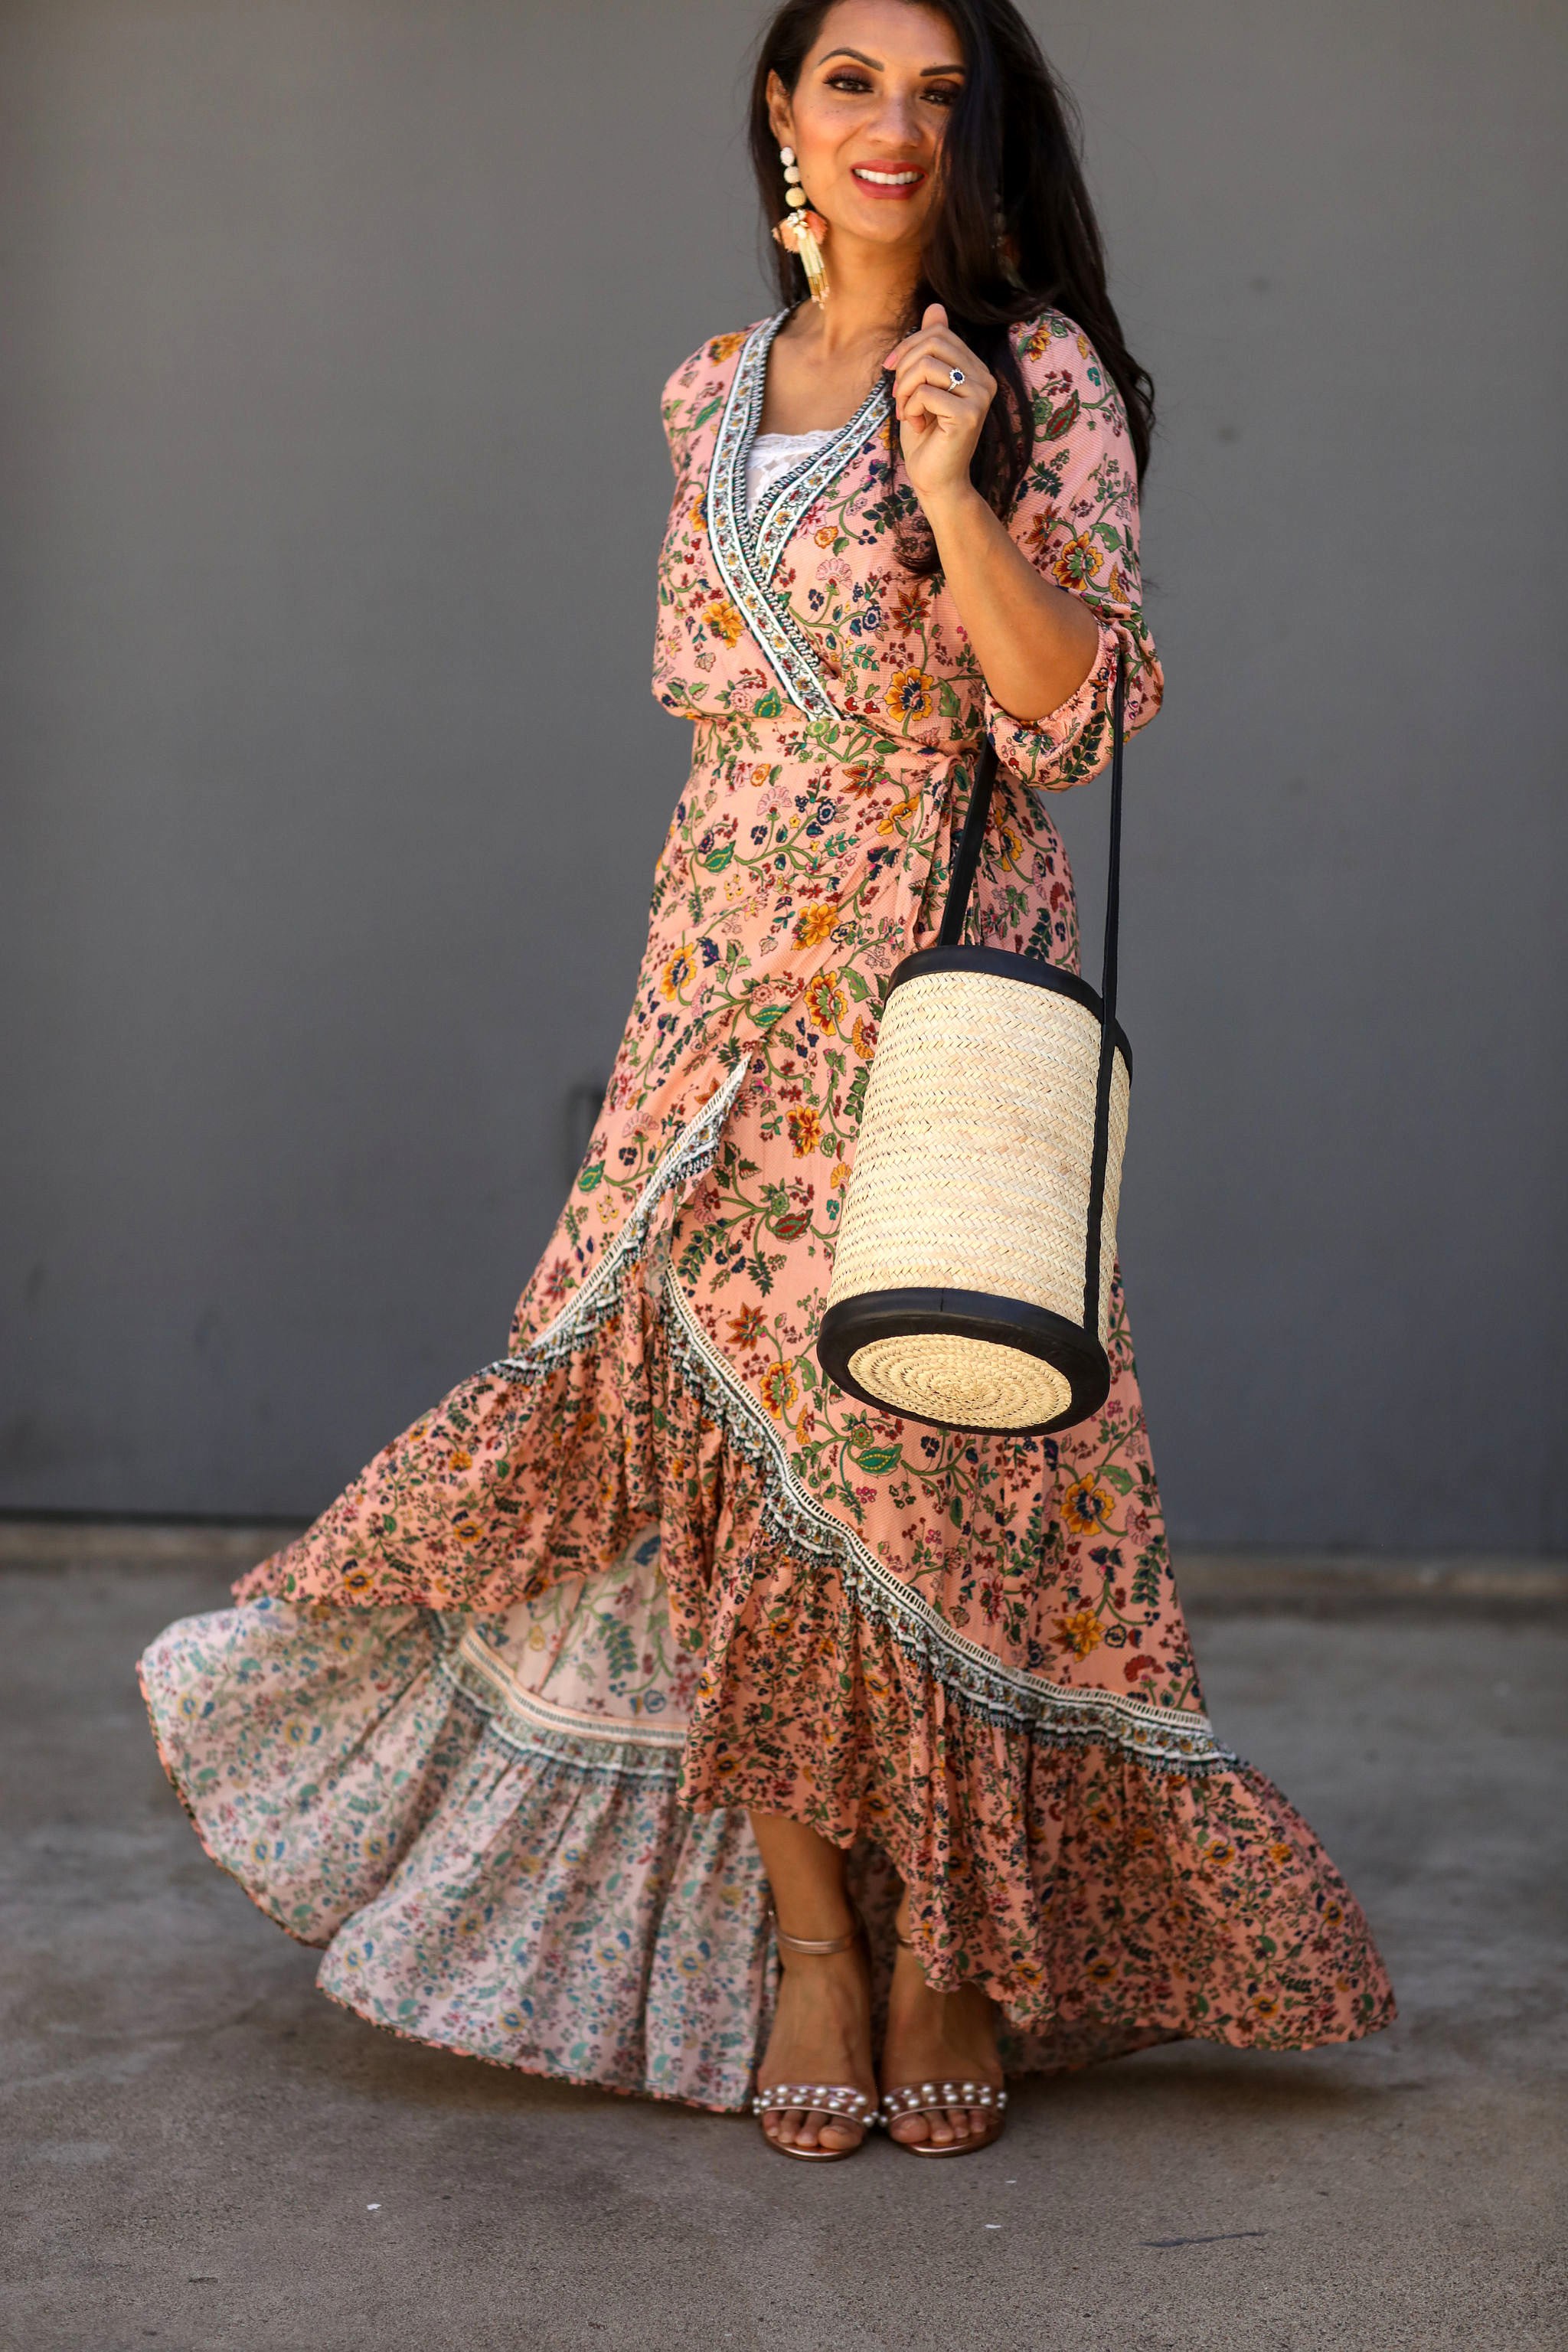 Looking for the perfect spring looks? Orange County Blogger Debbie Savage is sharing her top spring looks with Anthropologie. See them here!